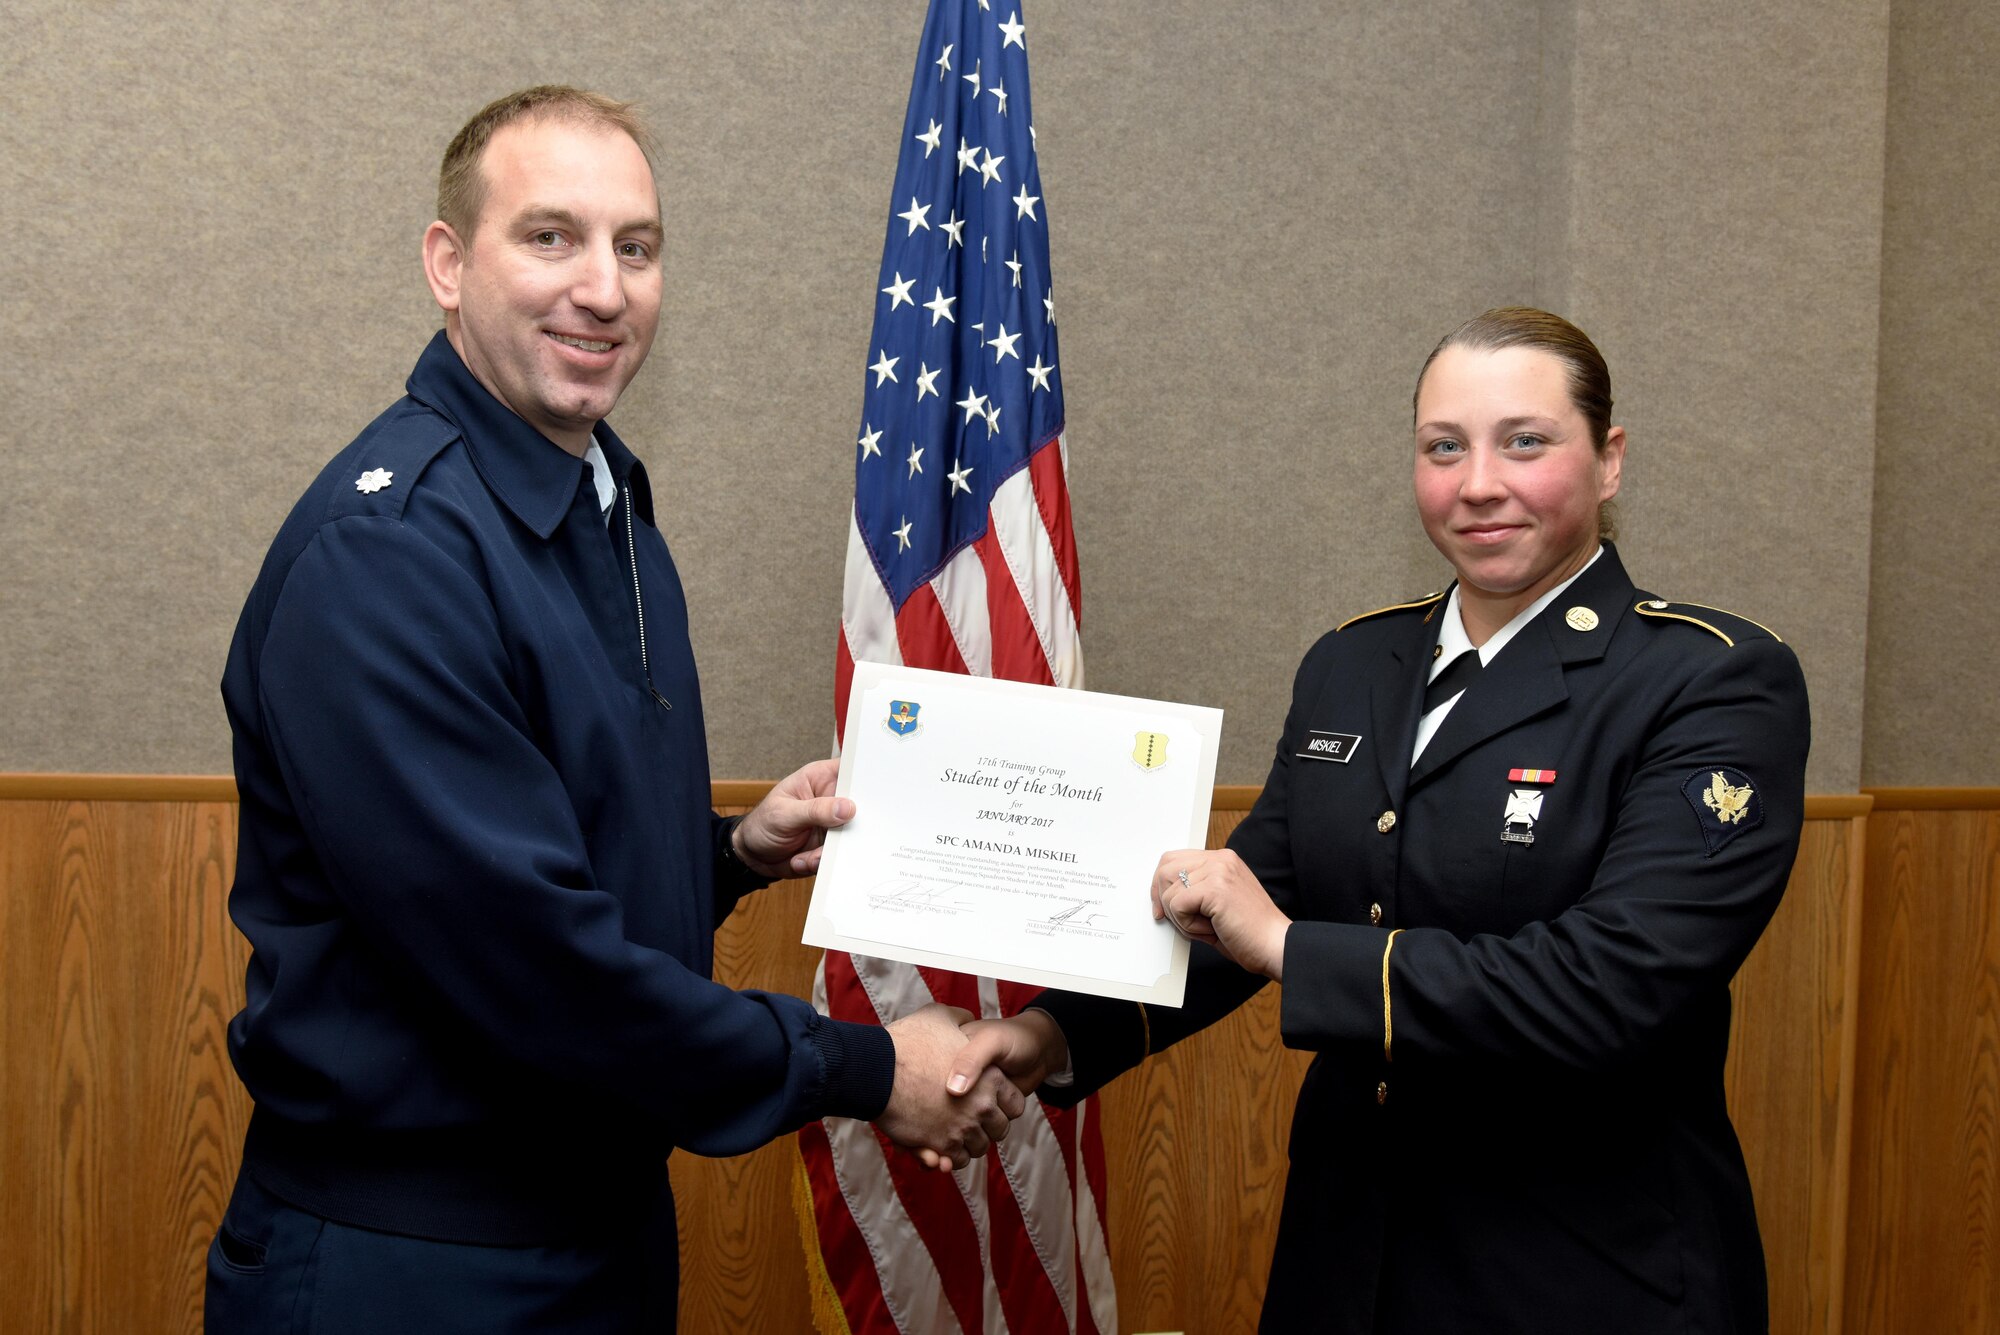 U.S. Air Force Lt. Col. Jason Kulchar, 315th Training Squadron director of operations, presents the 312th Training Squadron Student of the Month award for January 2017 to U.S. Army Spc. Amanda Miskiel, 312th TRS student, in the Brandenburg Hall on Goodfellow Air Force Base, Texas, Feb. 3, 2017. (U.S. Air Force photo by Staff Sgt. Joshua Edwards/Released)